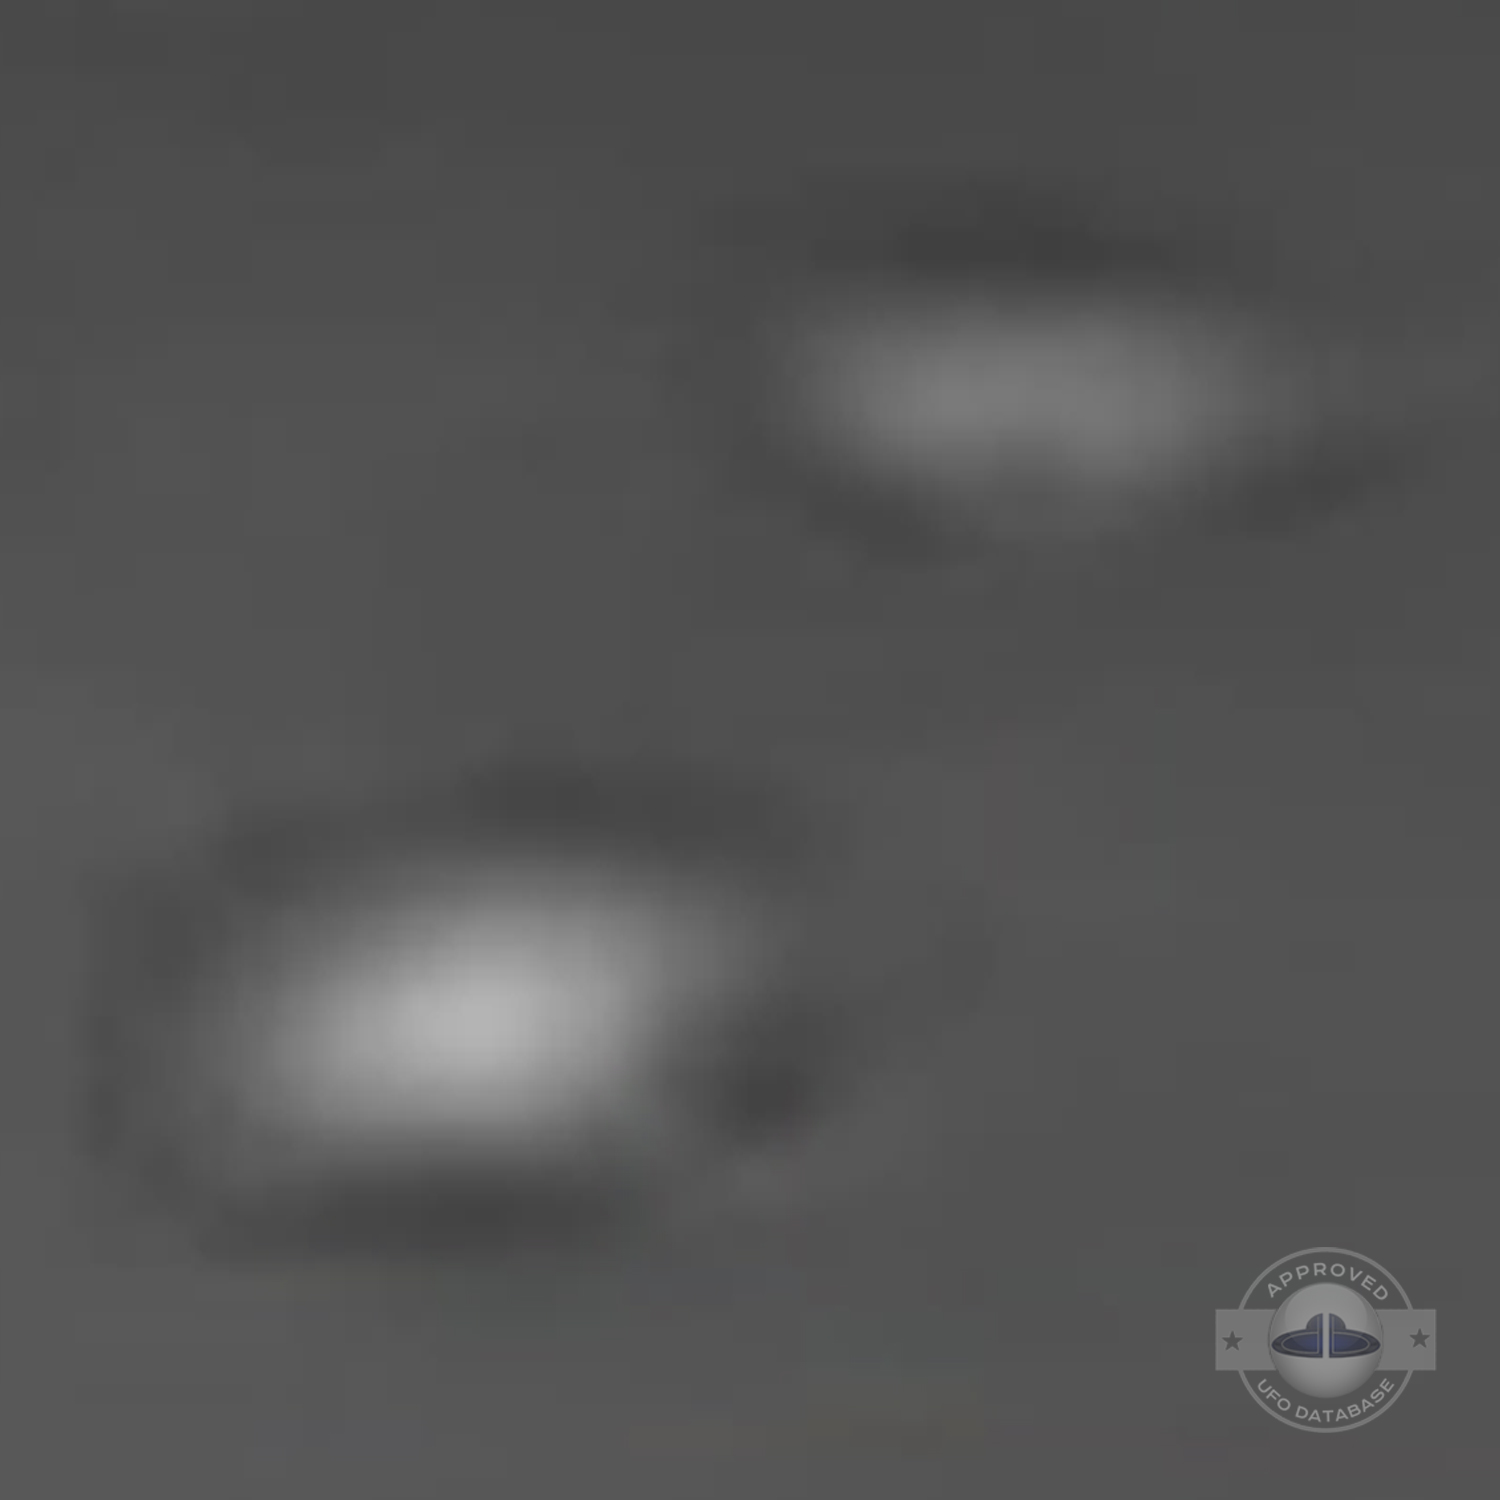 China UFO Sighting | Kunming, Yunnan UFO picture | October 14 2010 UFO Picture #151-6